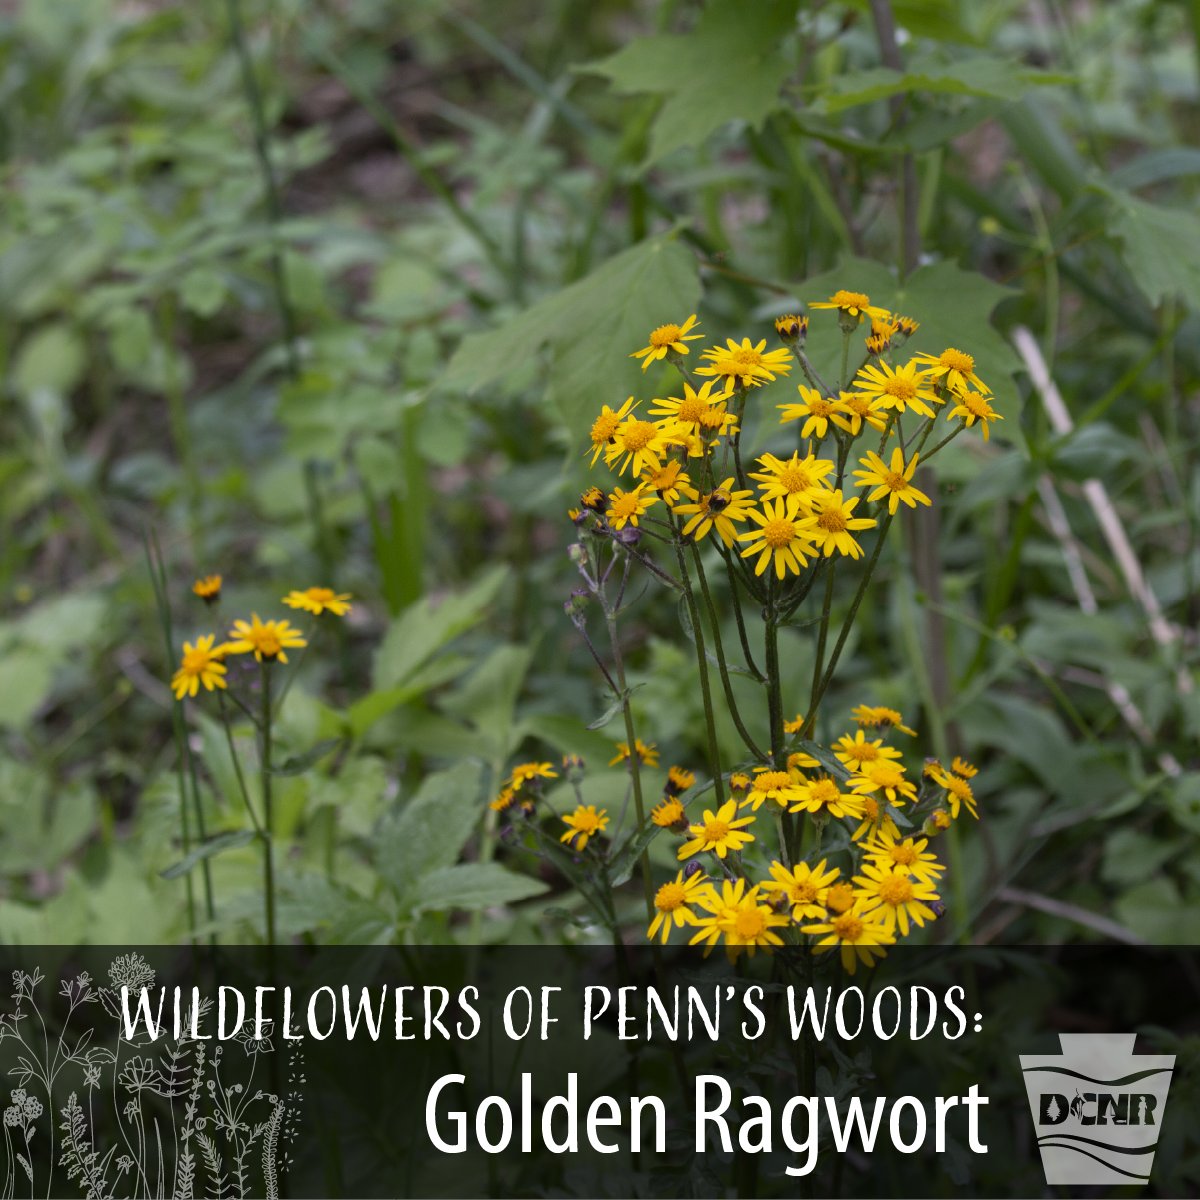 #GoldenRagwort’s bright yellow, daisy-like flowers bloom over the summer and can be found in every Pennsylvania county. This native wildflower attracts bees and other pollinators, and is found in woodlands, wetlands, and along streams. #WildflowerWeek #PaNativeSpecies